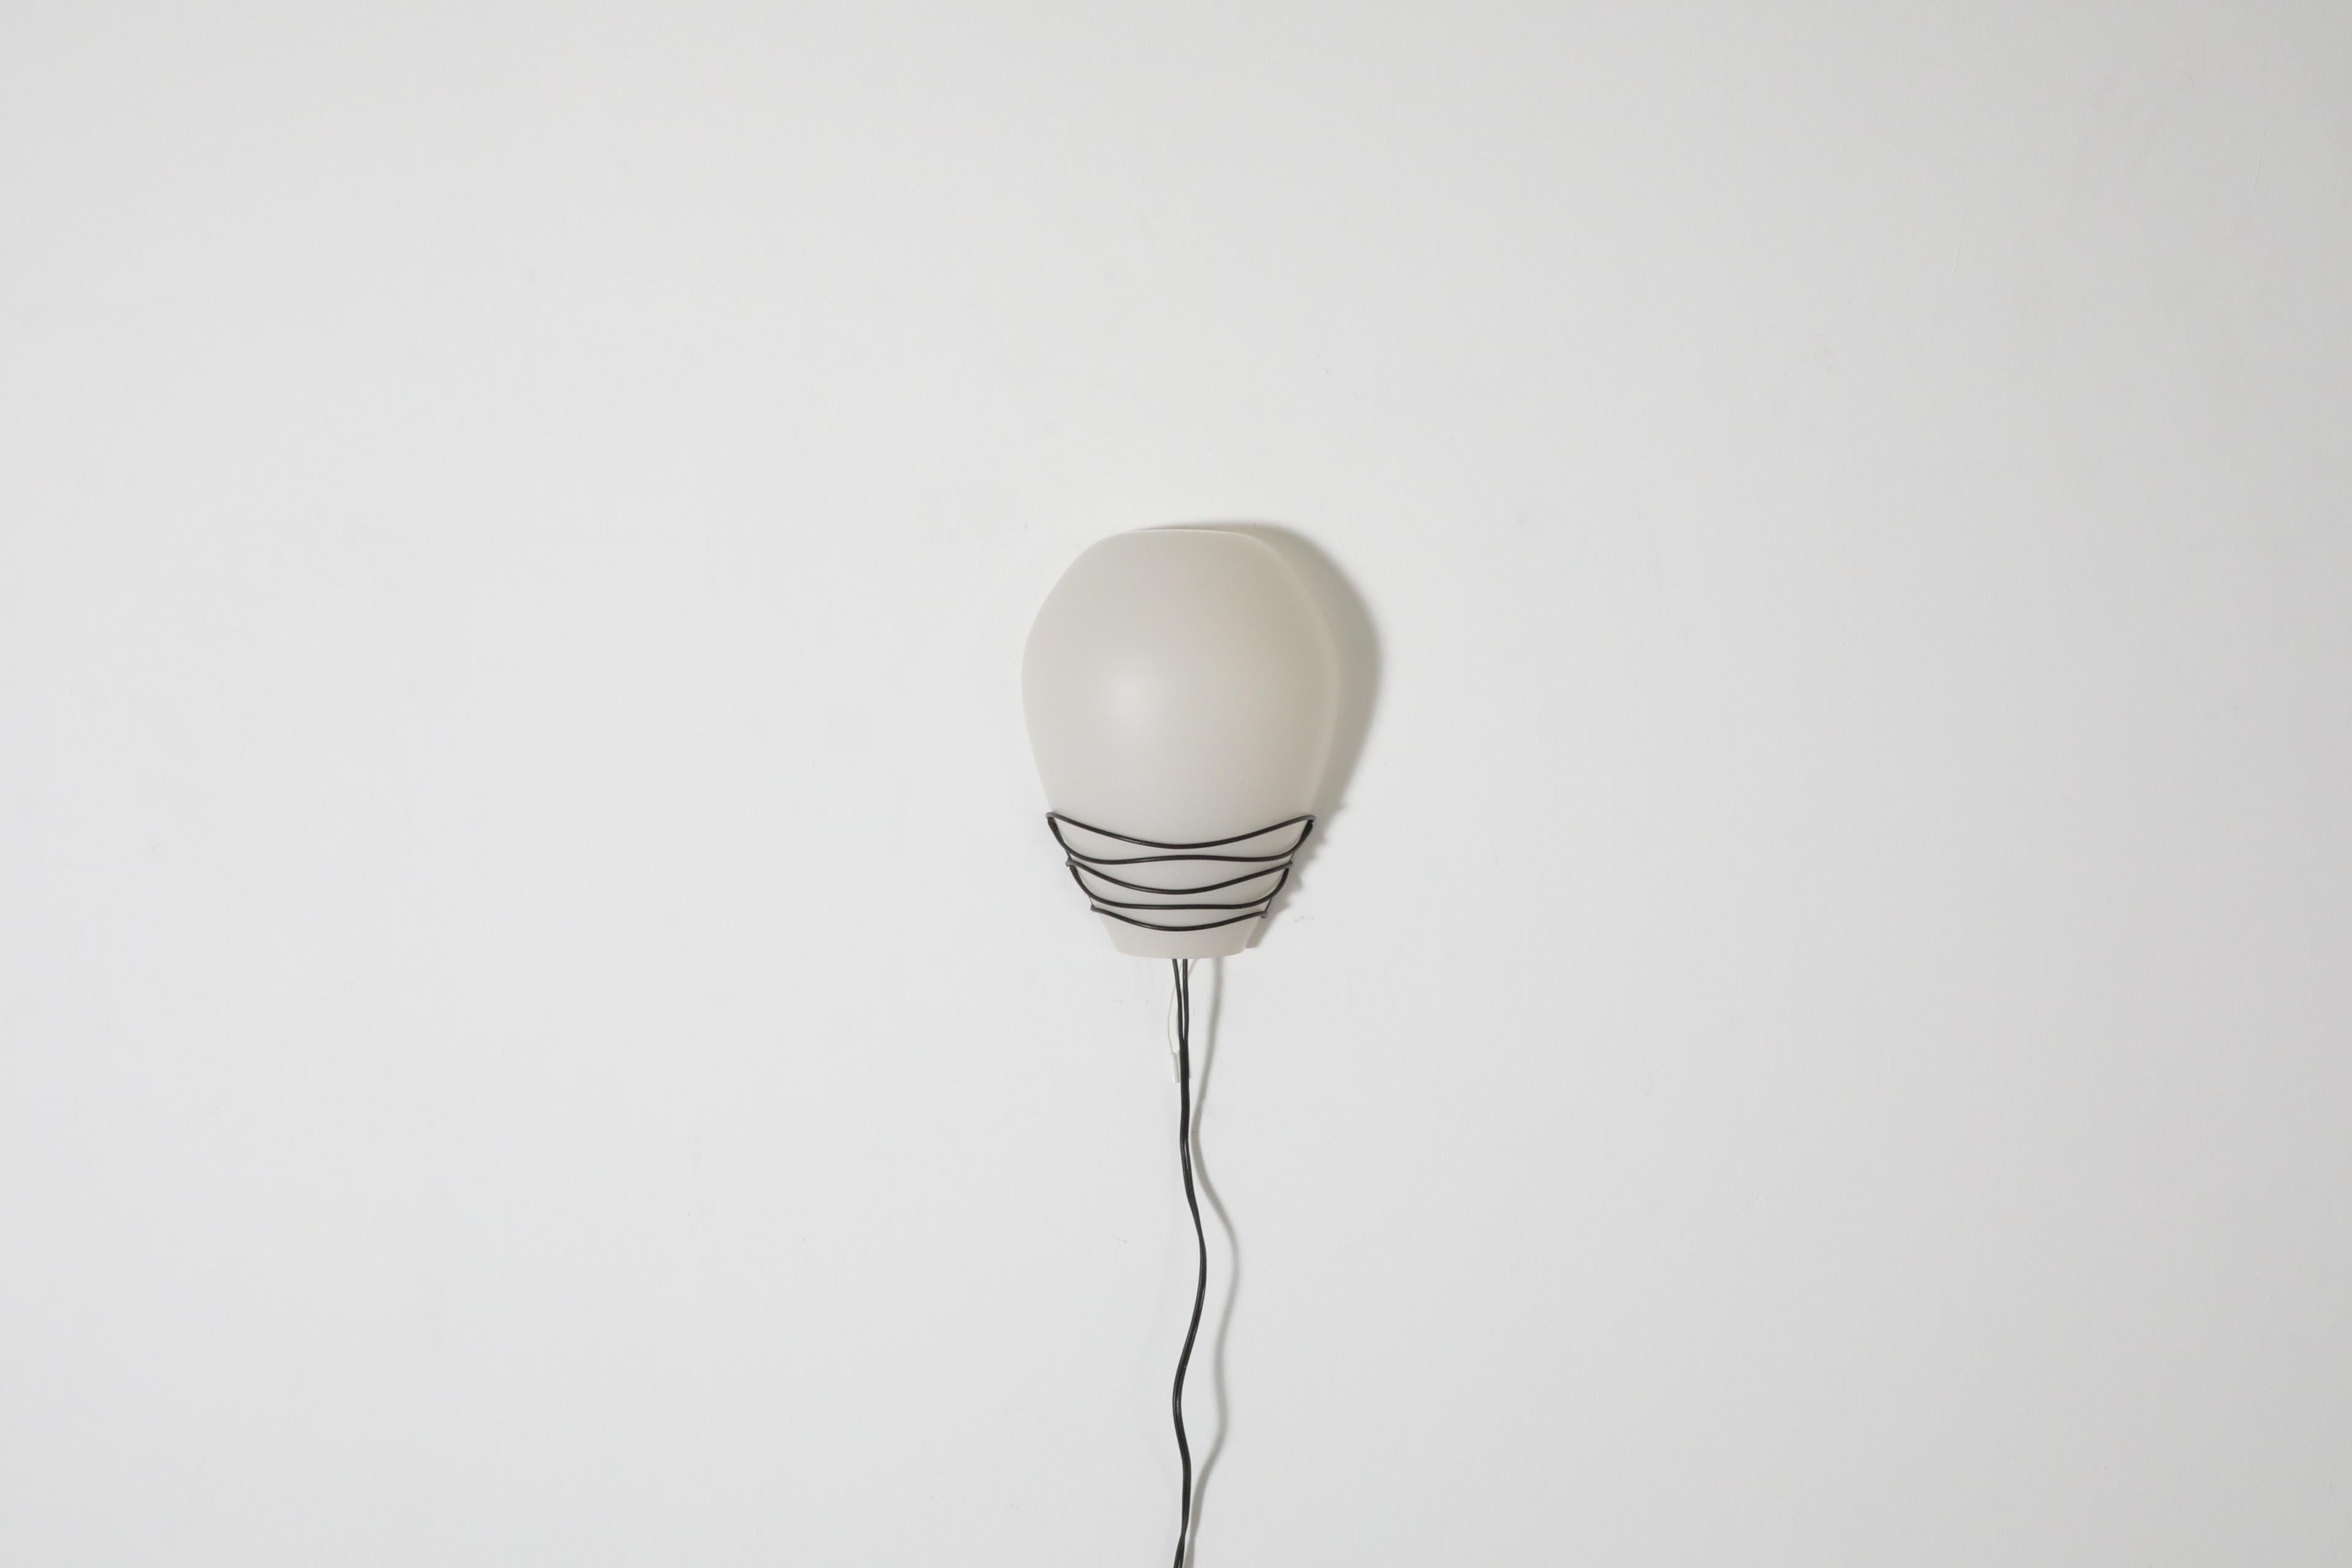 Philips Milk Glass Wall Sconce w/ Black Wire Mount and Milk Glass Shade, 1950's For Sale 7